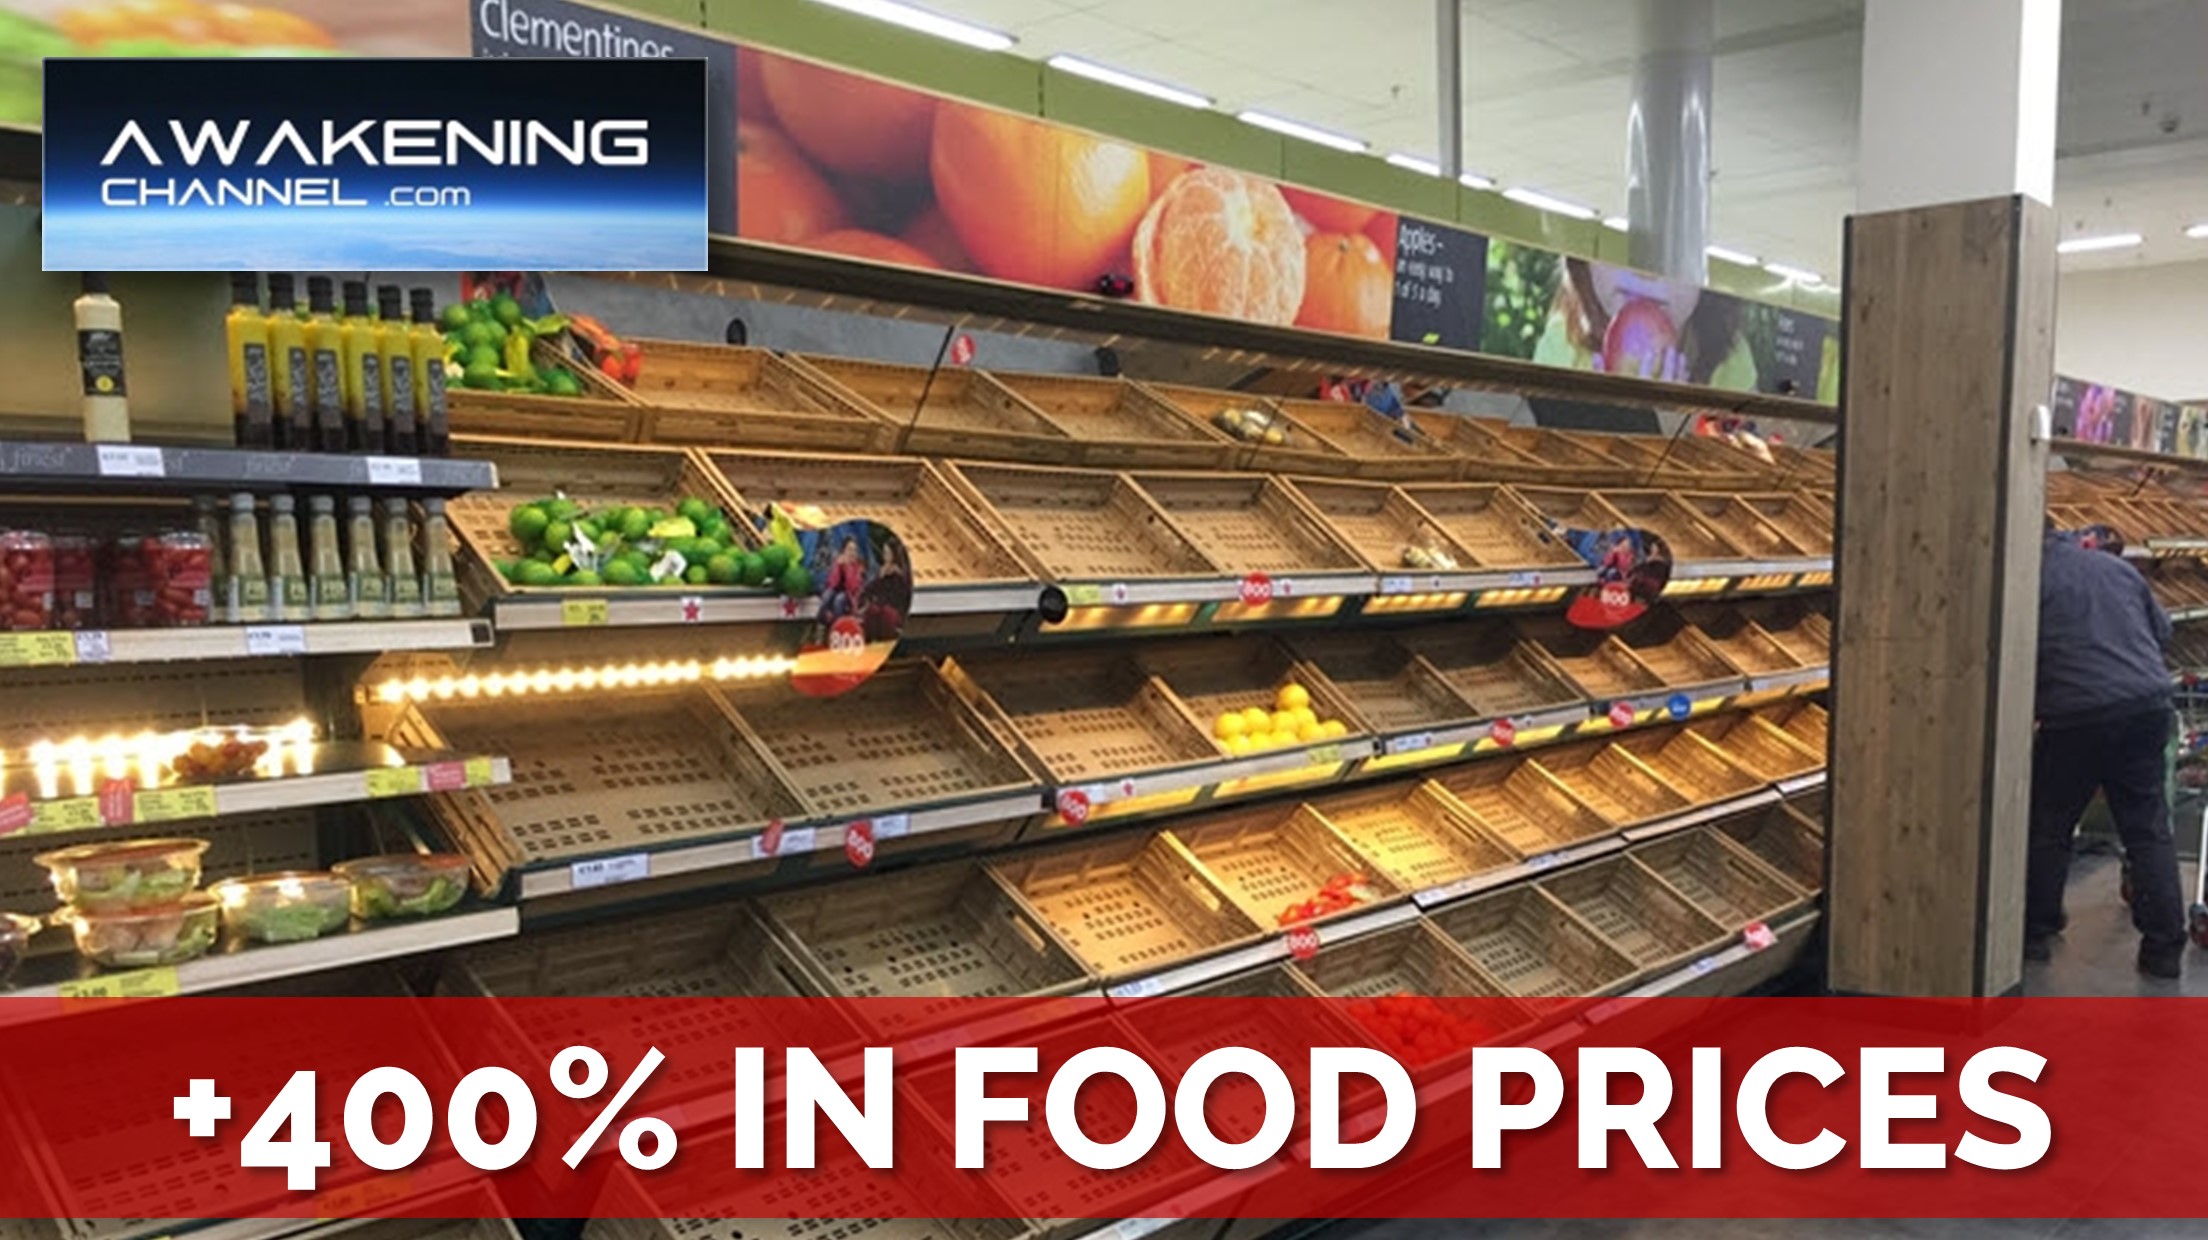 +400% INCREASE IN FOOD PRICES AHEAD